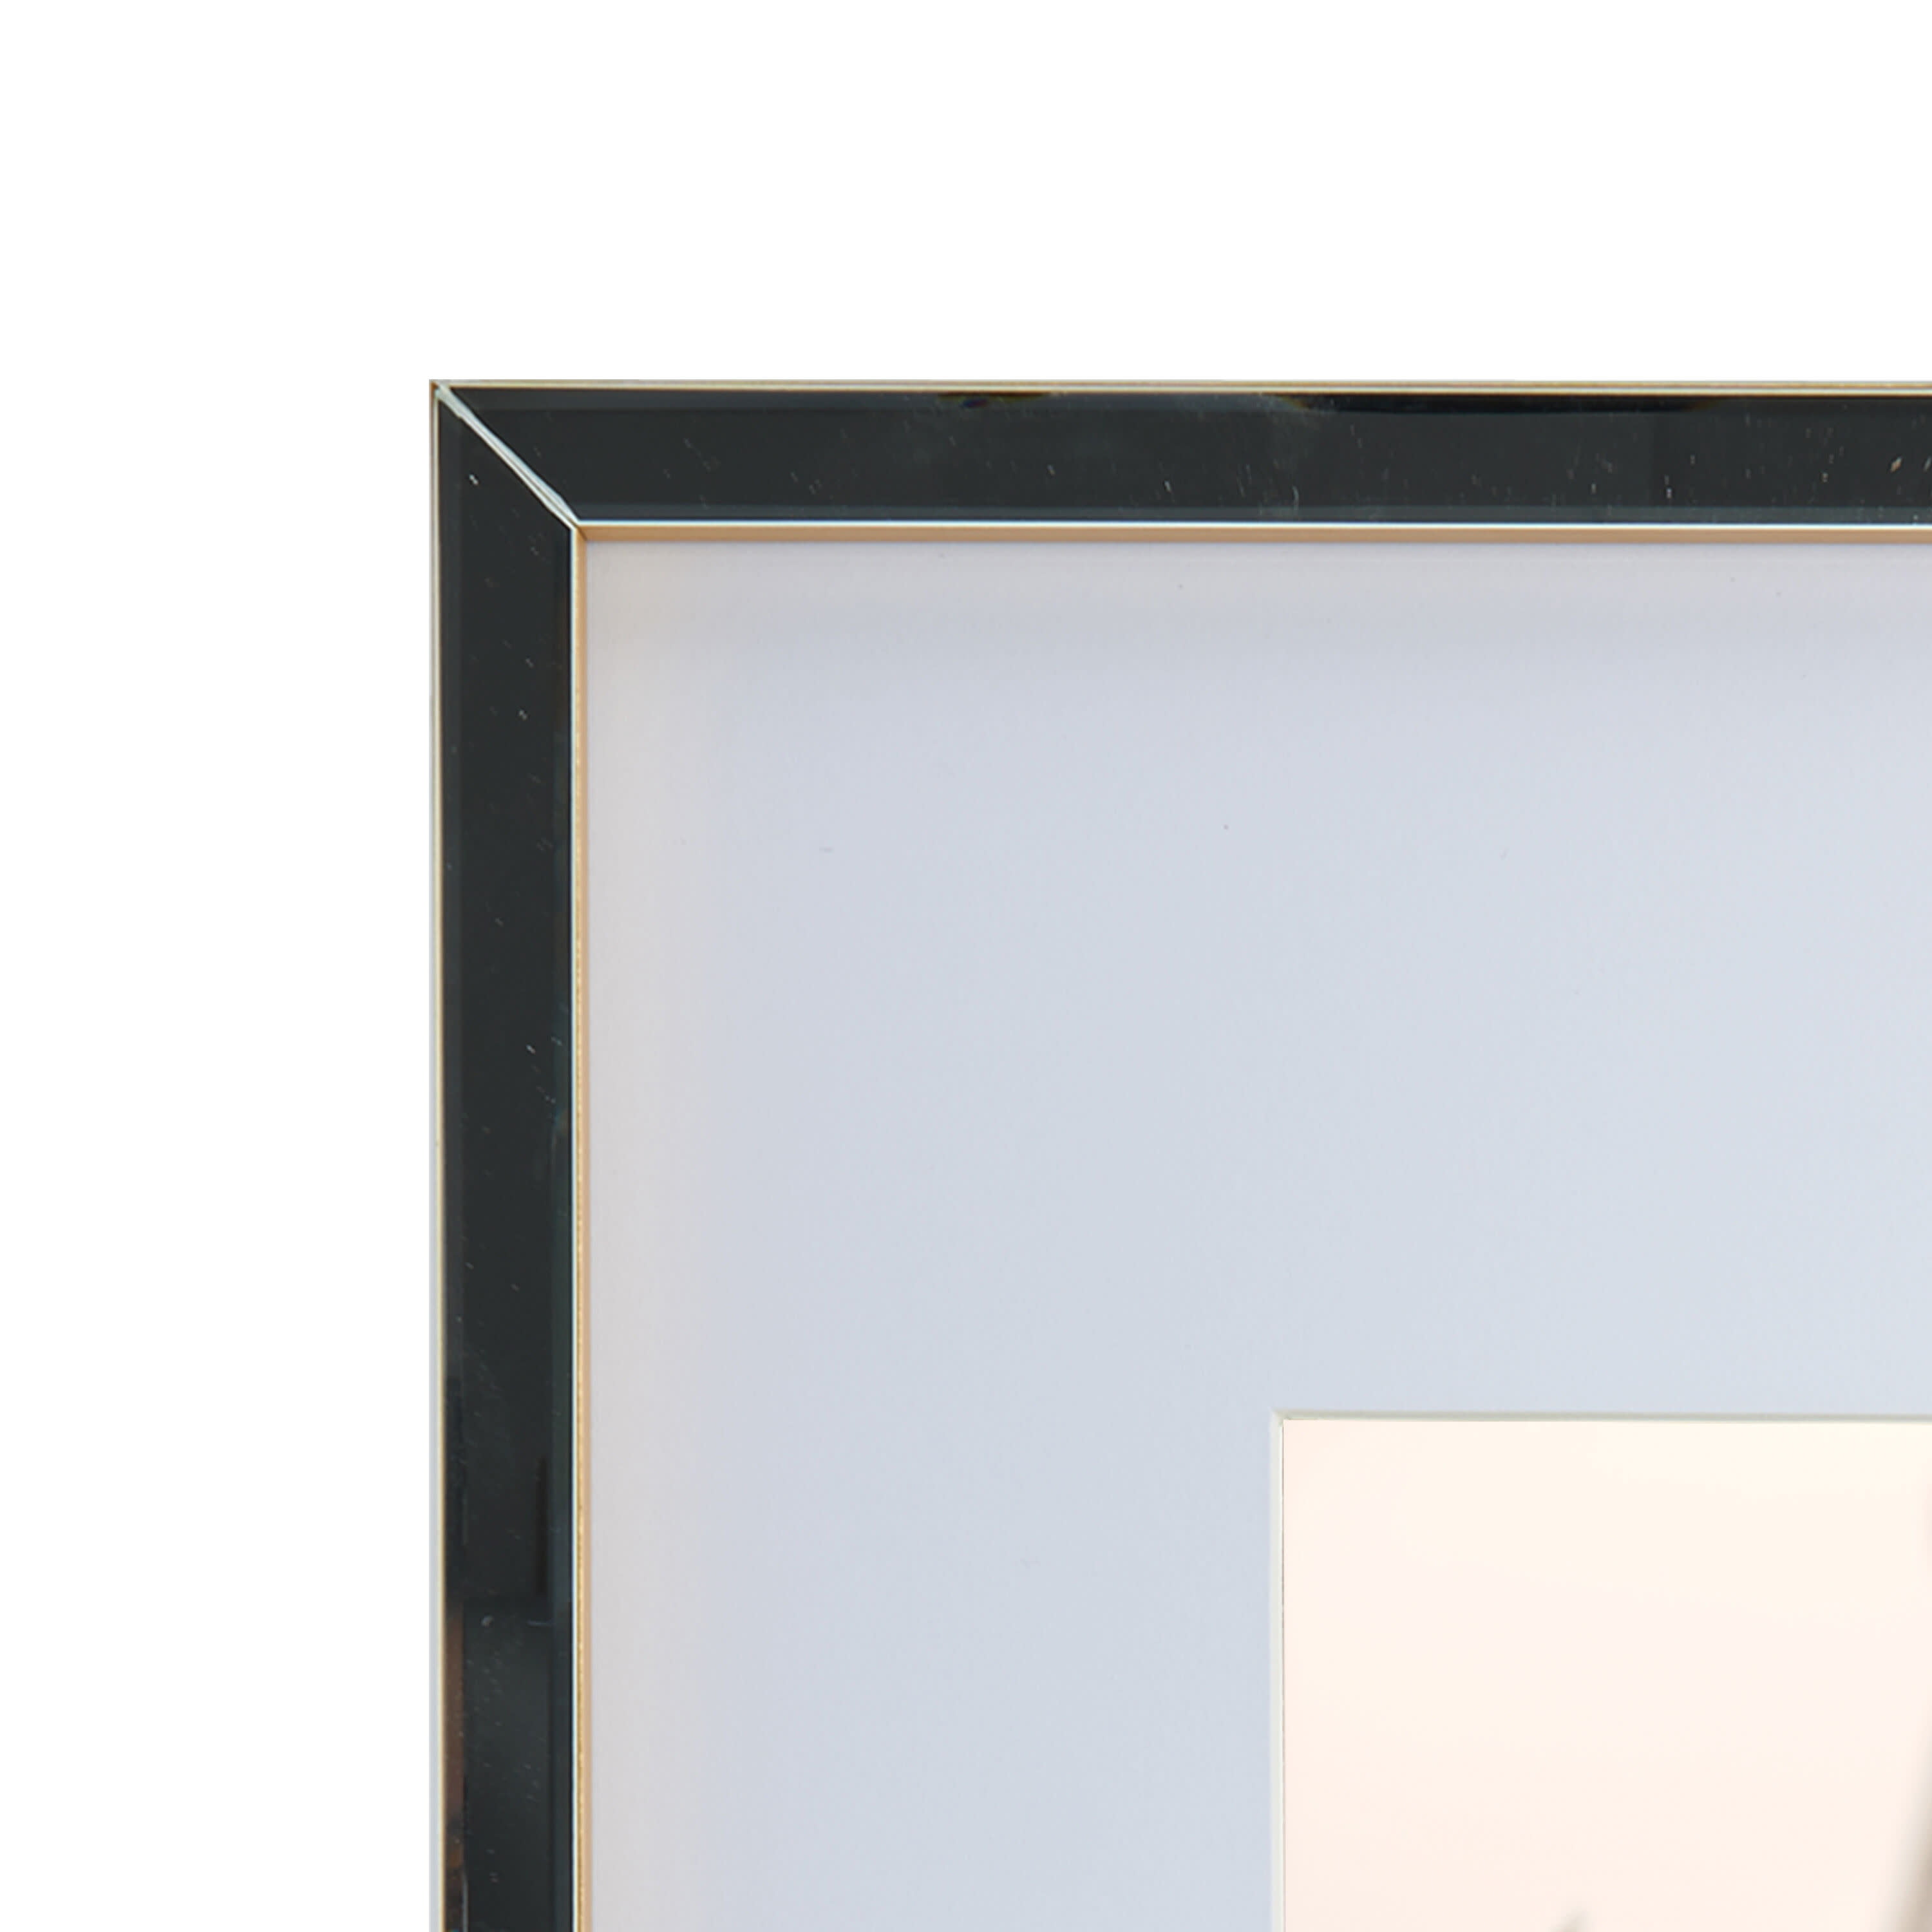 Gold Mirror 16 x 20 Gallery Frame, Matted to 8 x 10 – Mikasa